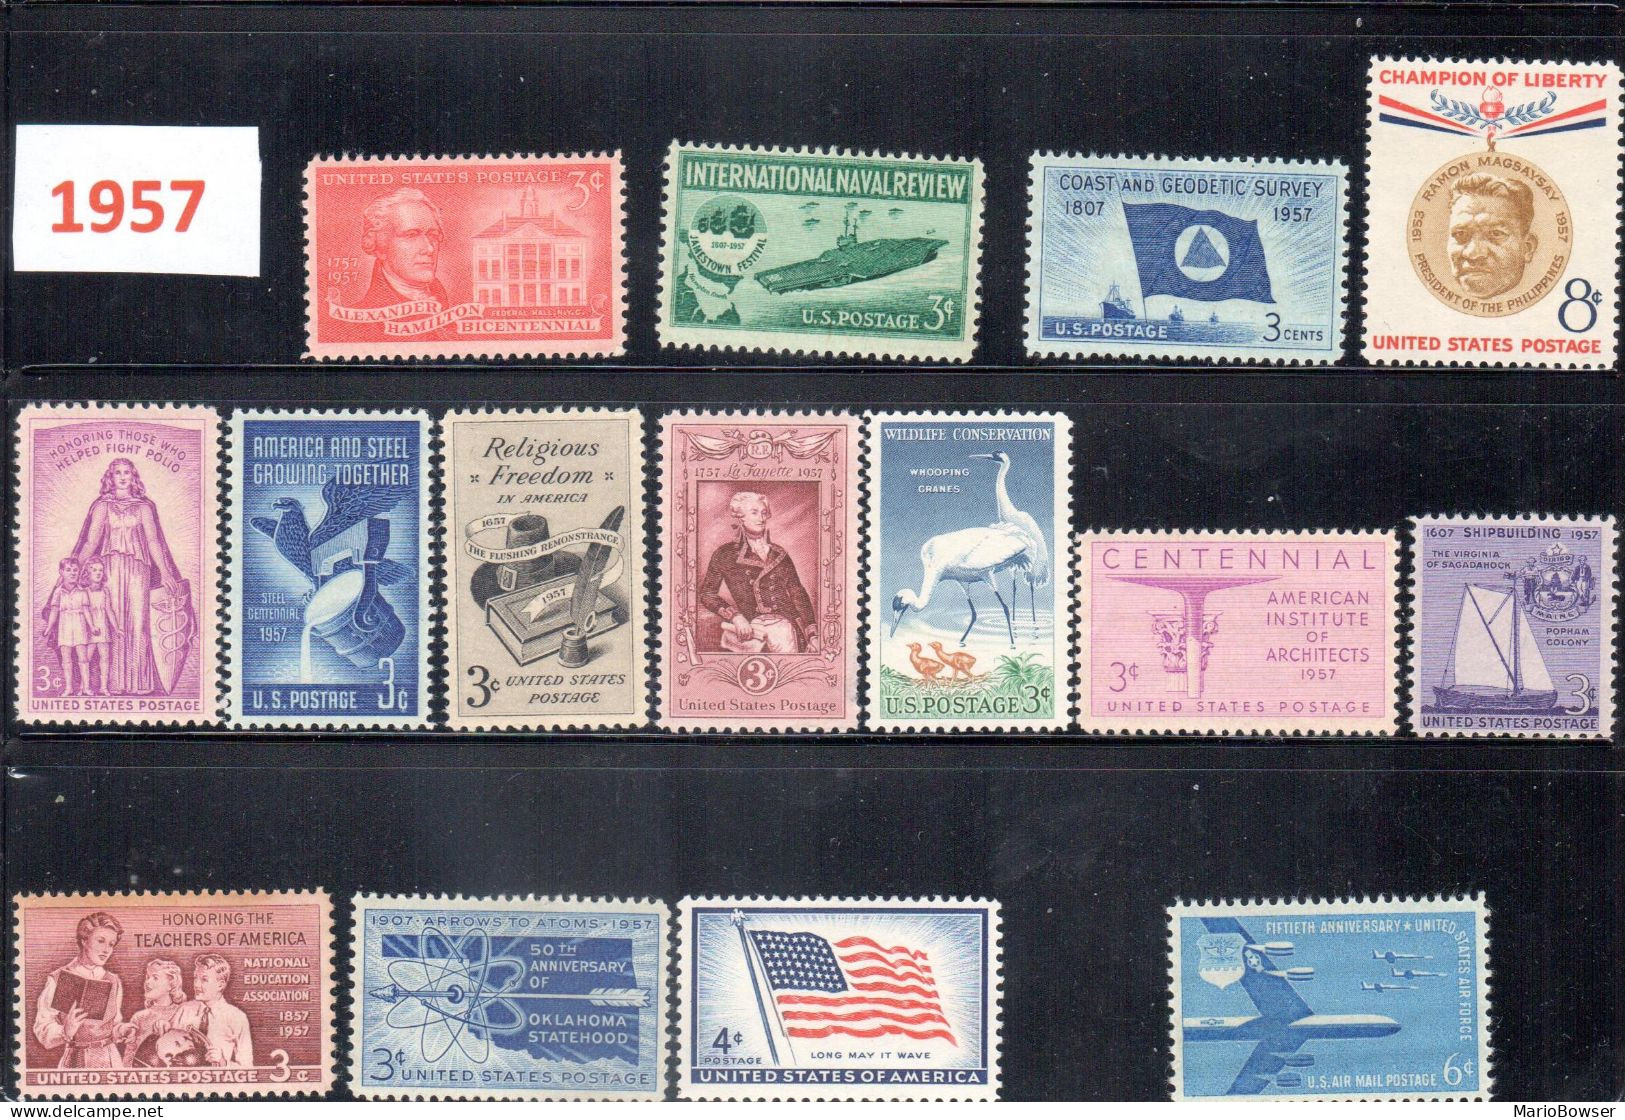 USA 1957 Full Year Commemorative MNH Stamps Set 15 Stamps With Airmail - Ganze Jahrgänge